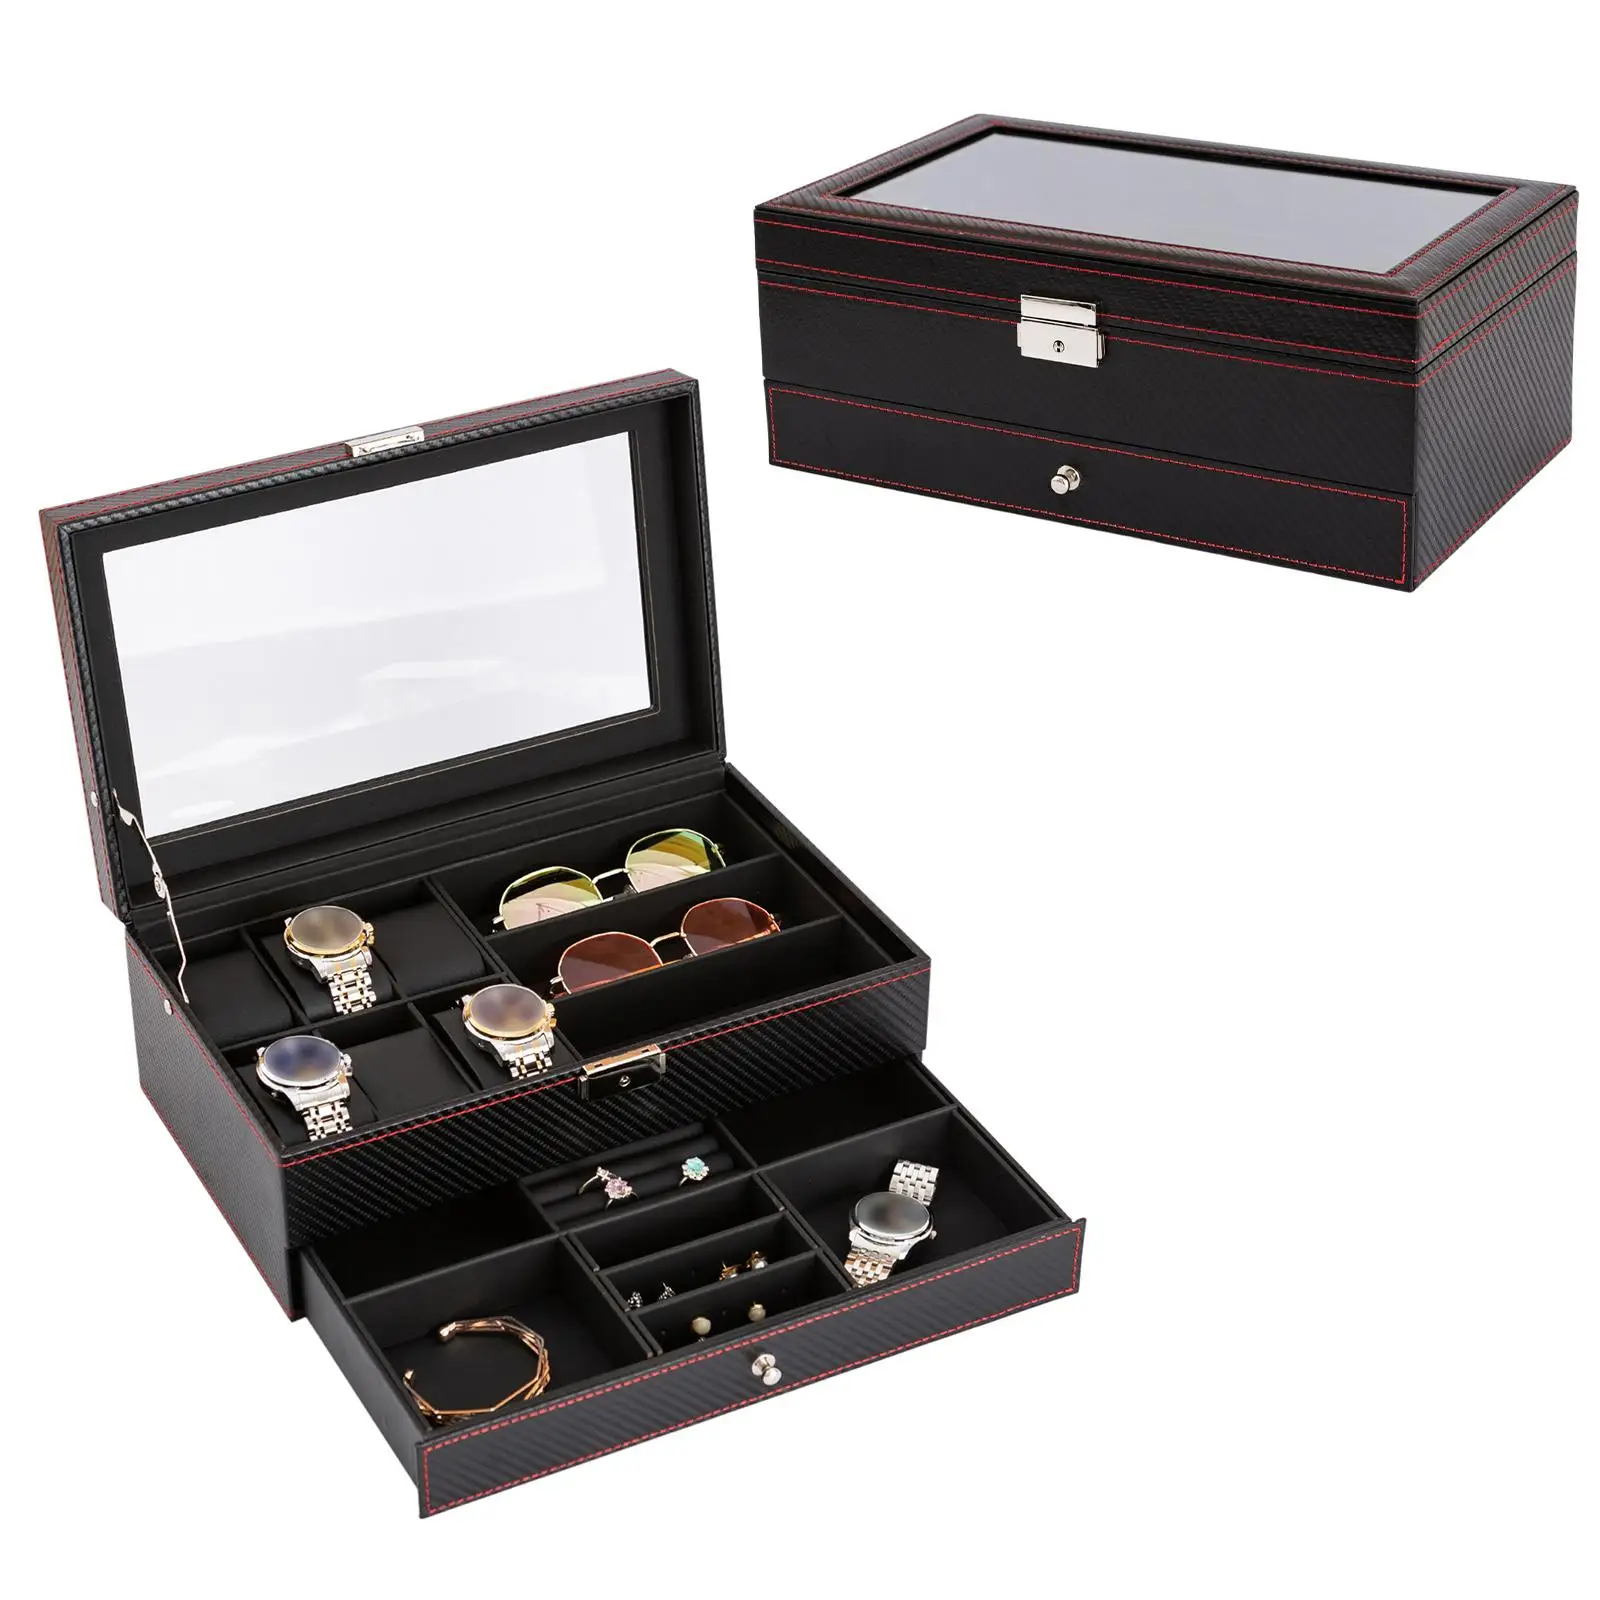 Double Layer Jewelry Display Case PU Leather Multifunctional Portable Watch Storage Box for Earrings Necklace Home Decoration